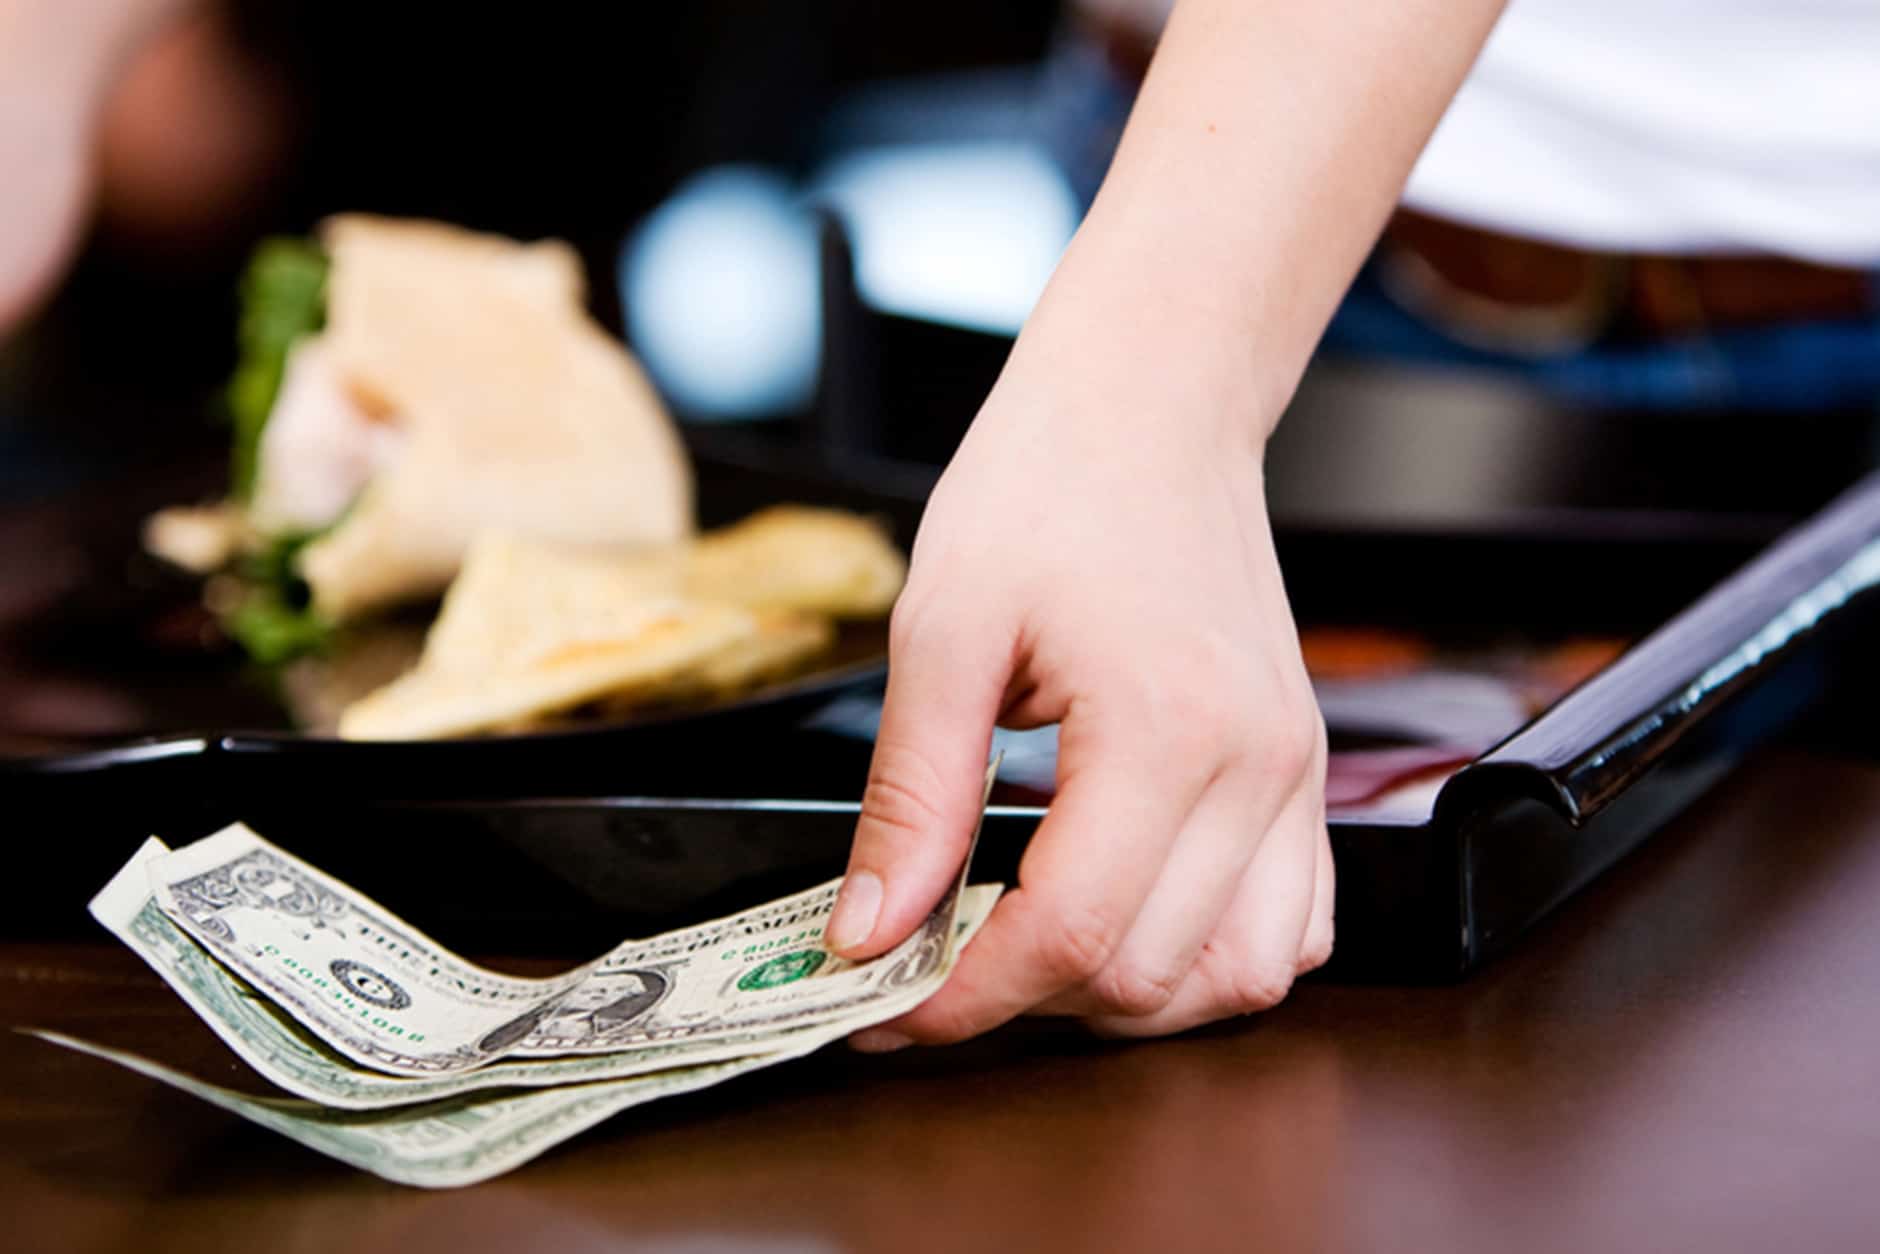 Tipping in Vietnam isn't as common as in many other countries